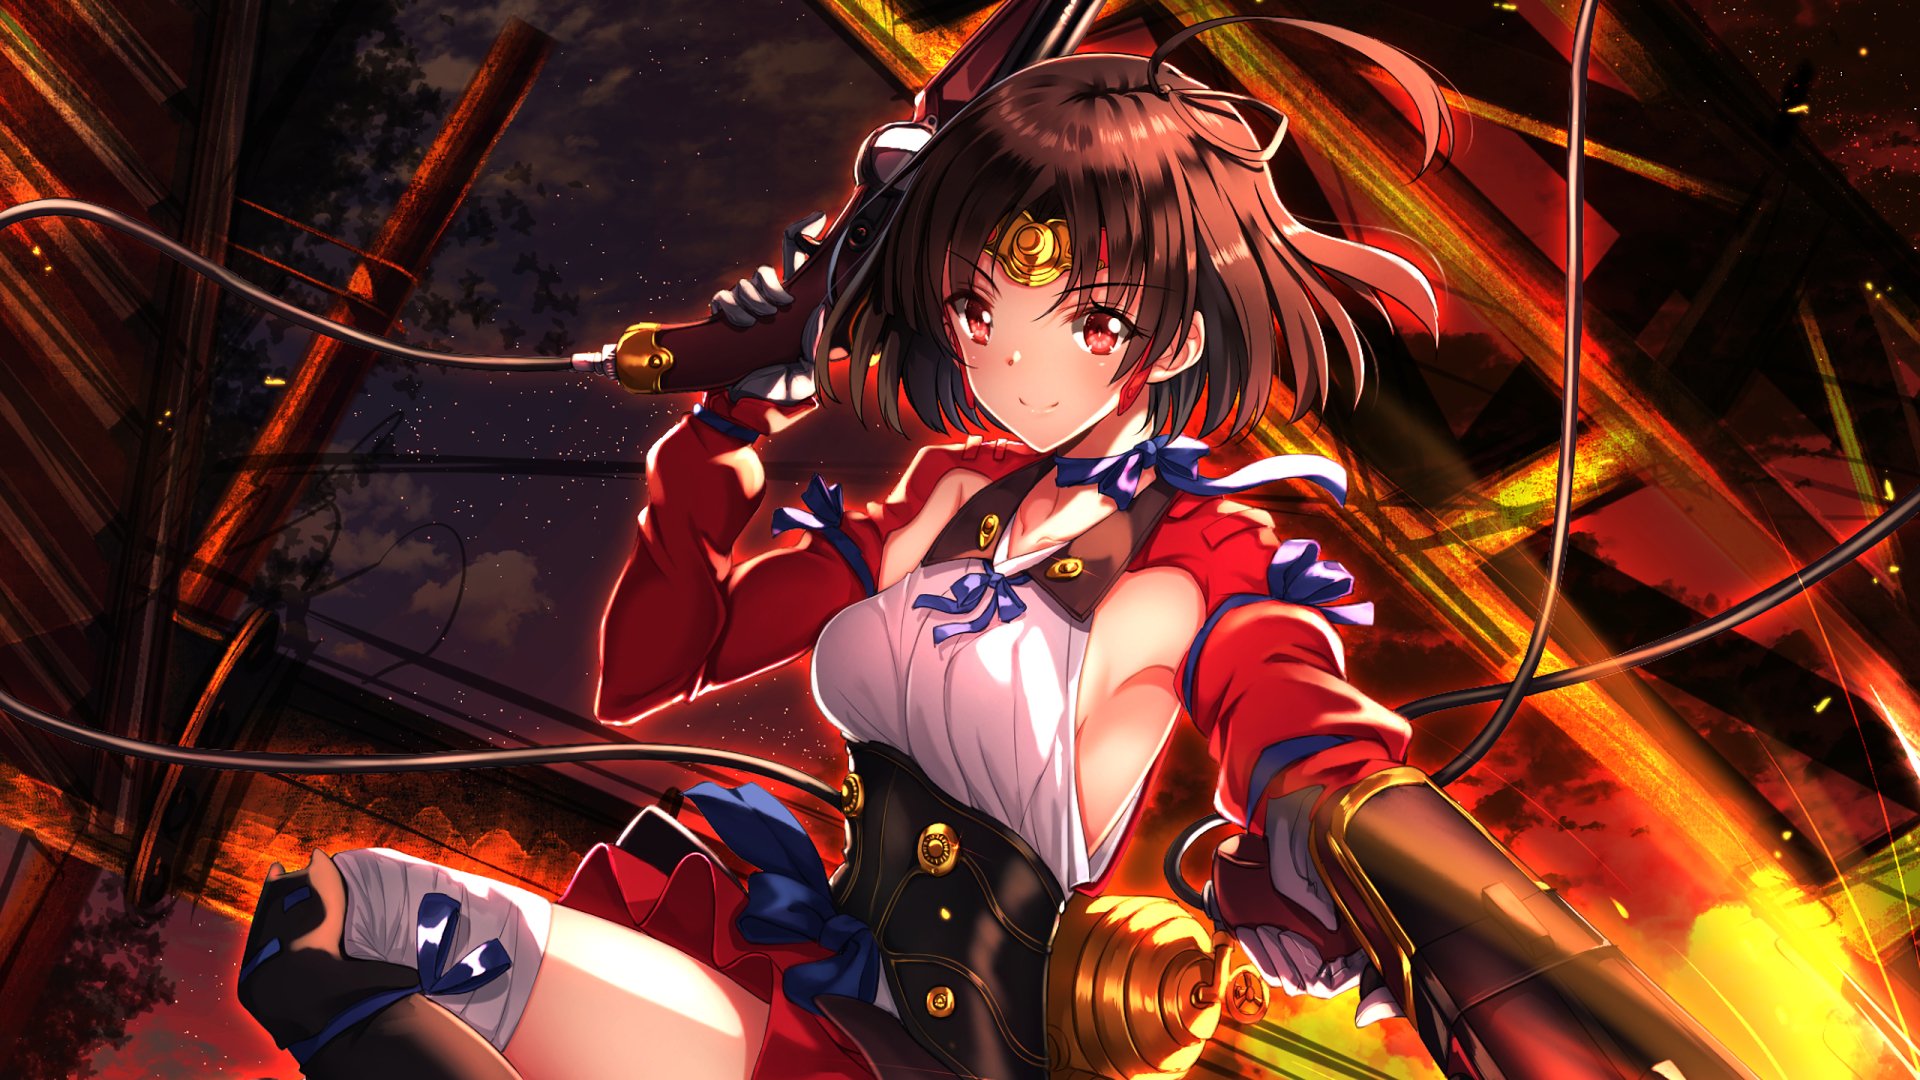 Anime Kabaneri of the Iron Fortress HD Wallpaper by 刃天 (pixiv)